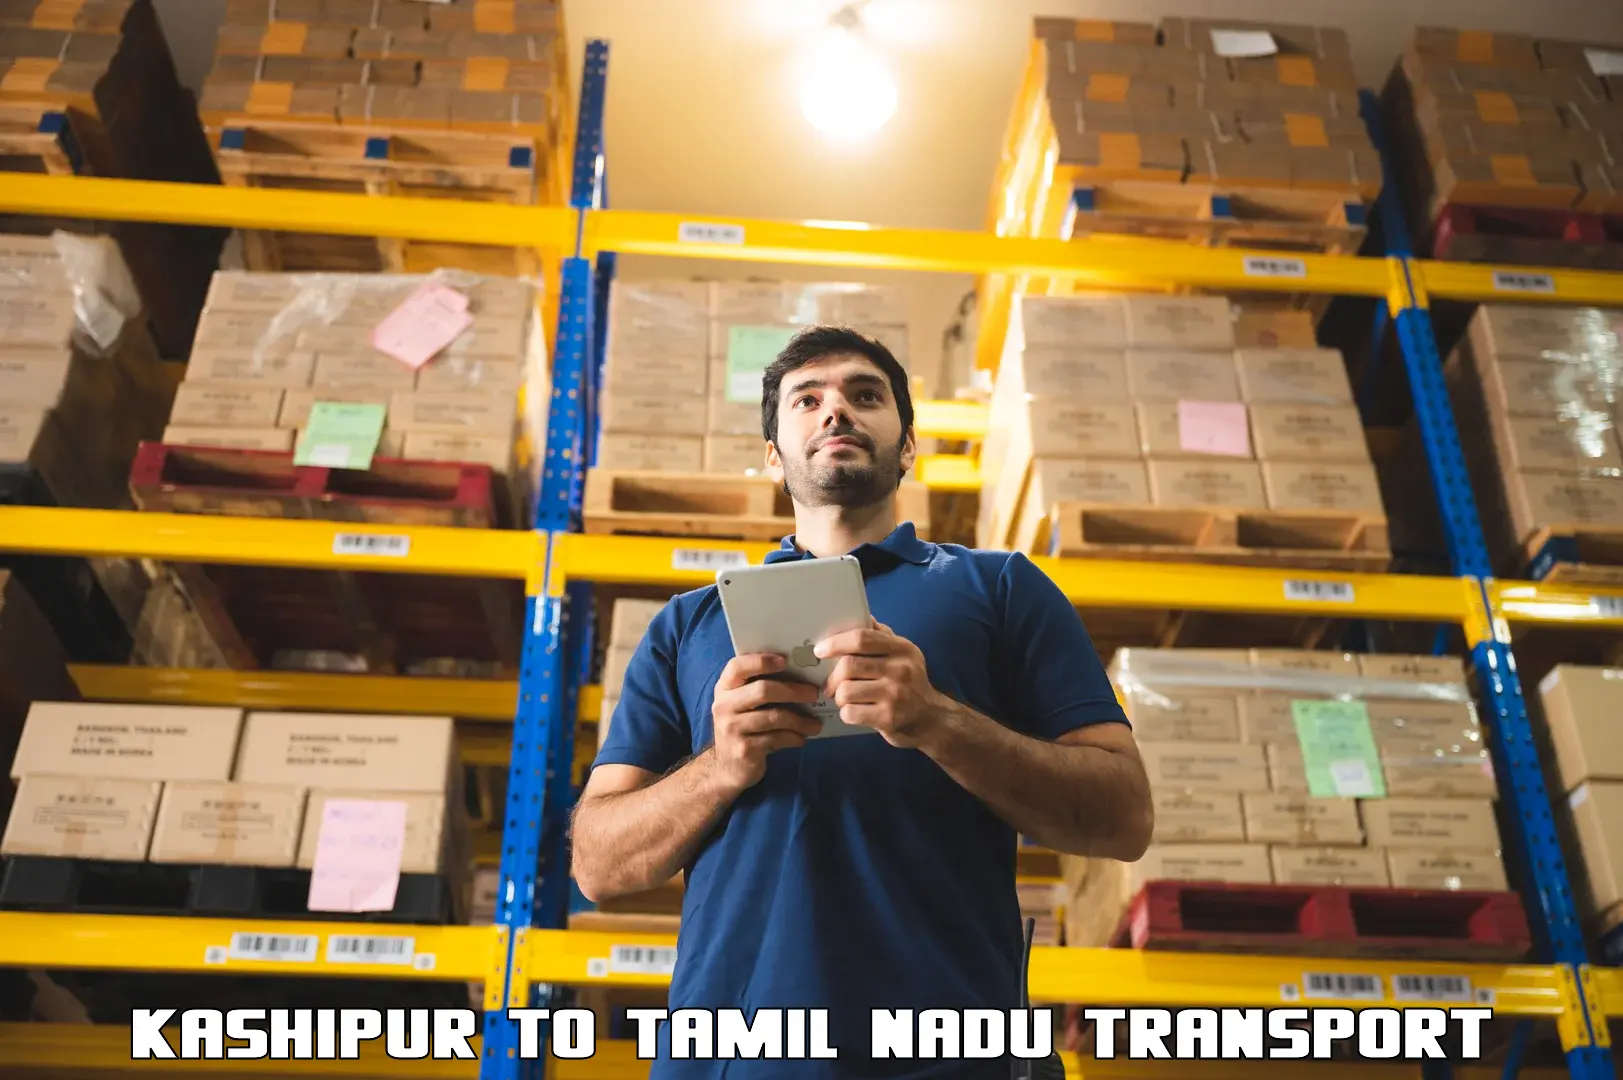 Bike shipping service Kashipur to Vellore Institute of Technology